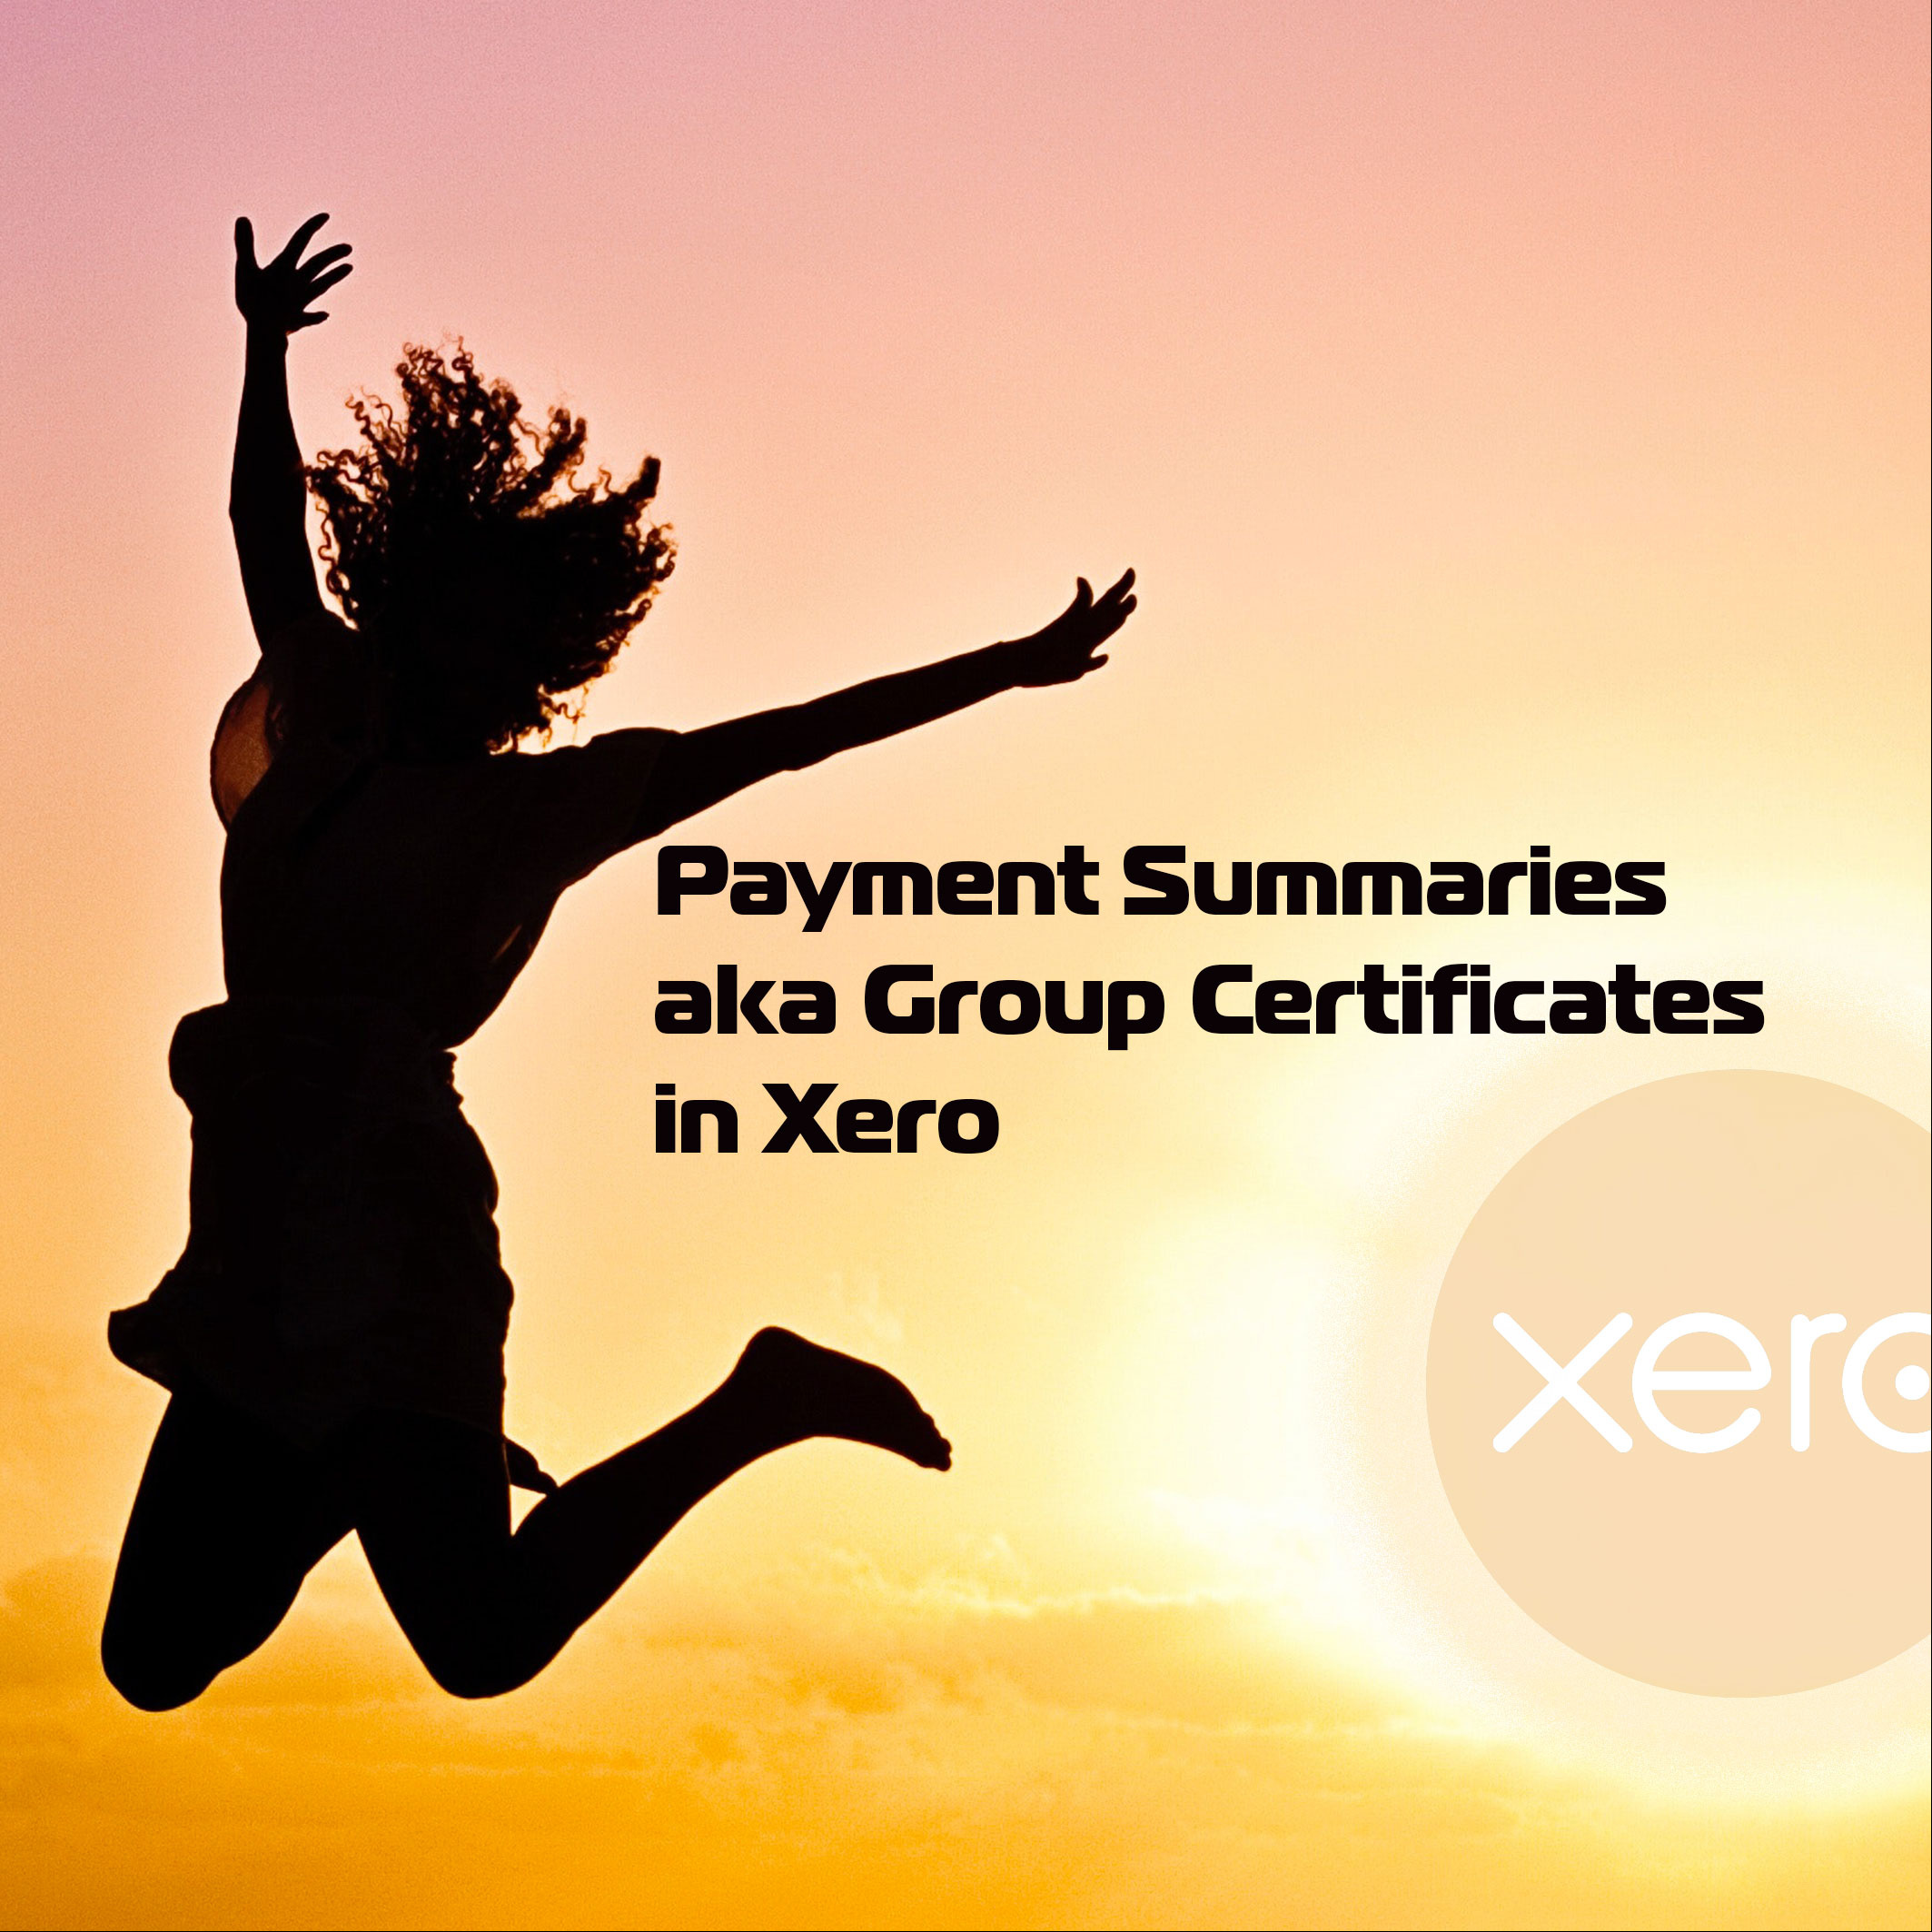 How-to-prepare-Payment-Summaries aka Group Certificates in Xero for employees